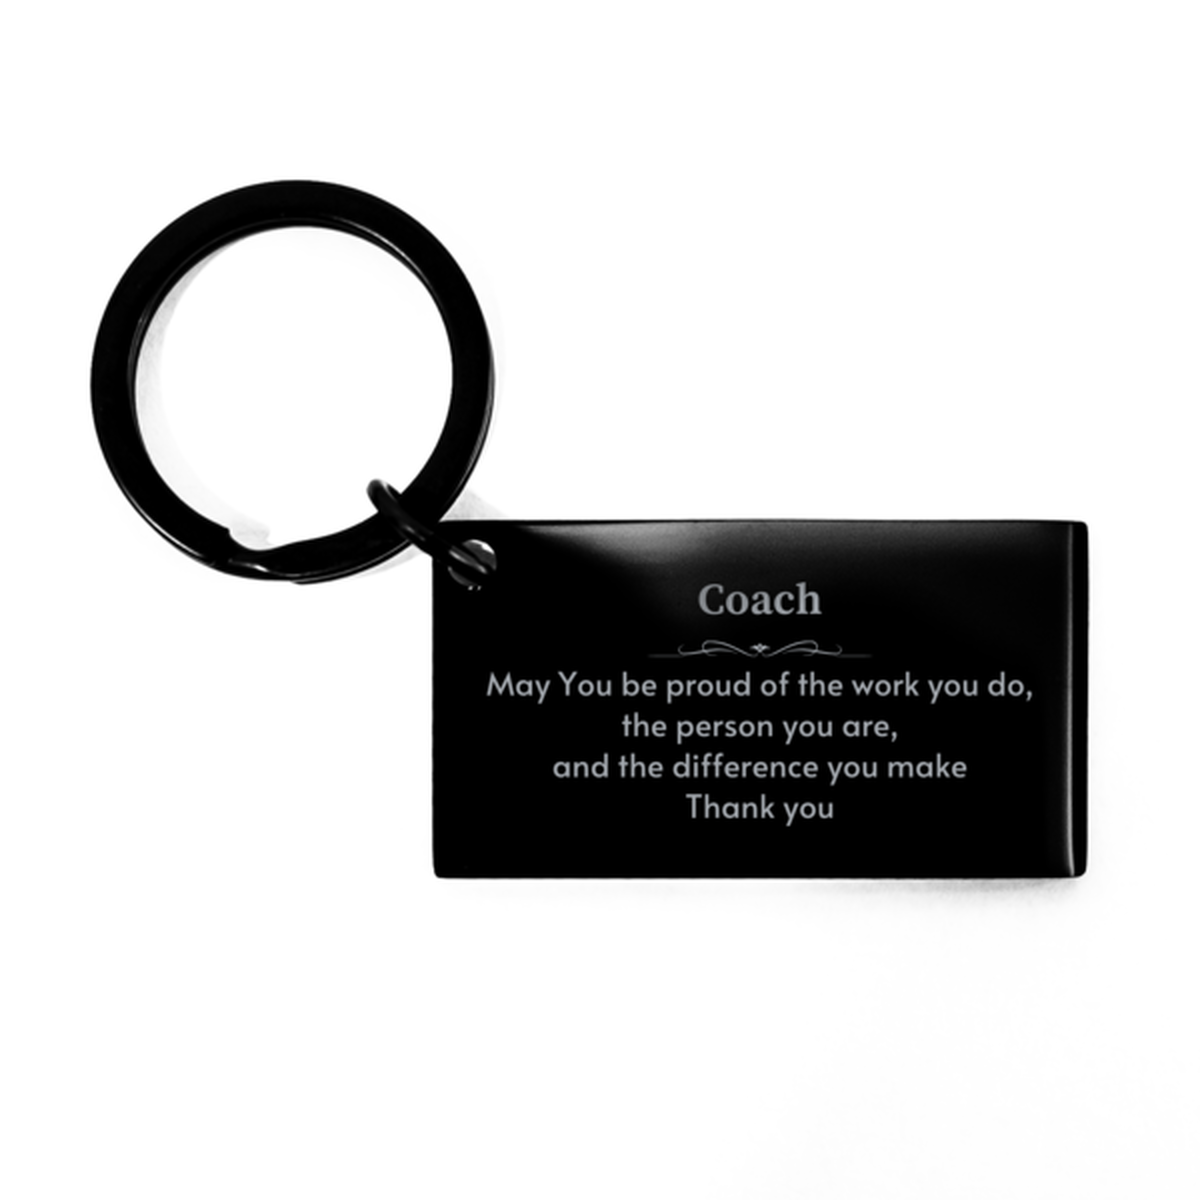 Heartwarming Keychain Retirement Coworkers Gifts for Coach, Drug Counselor May You be proud of the work you do, the person you are Gifts for Boss Men Women Friends